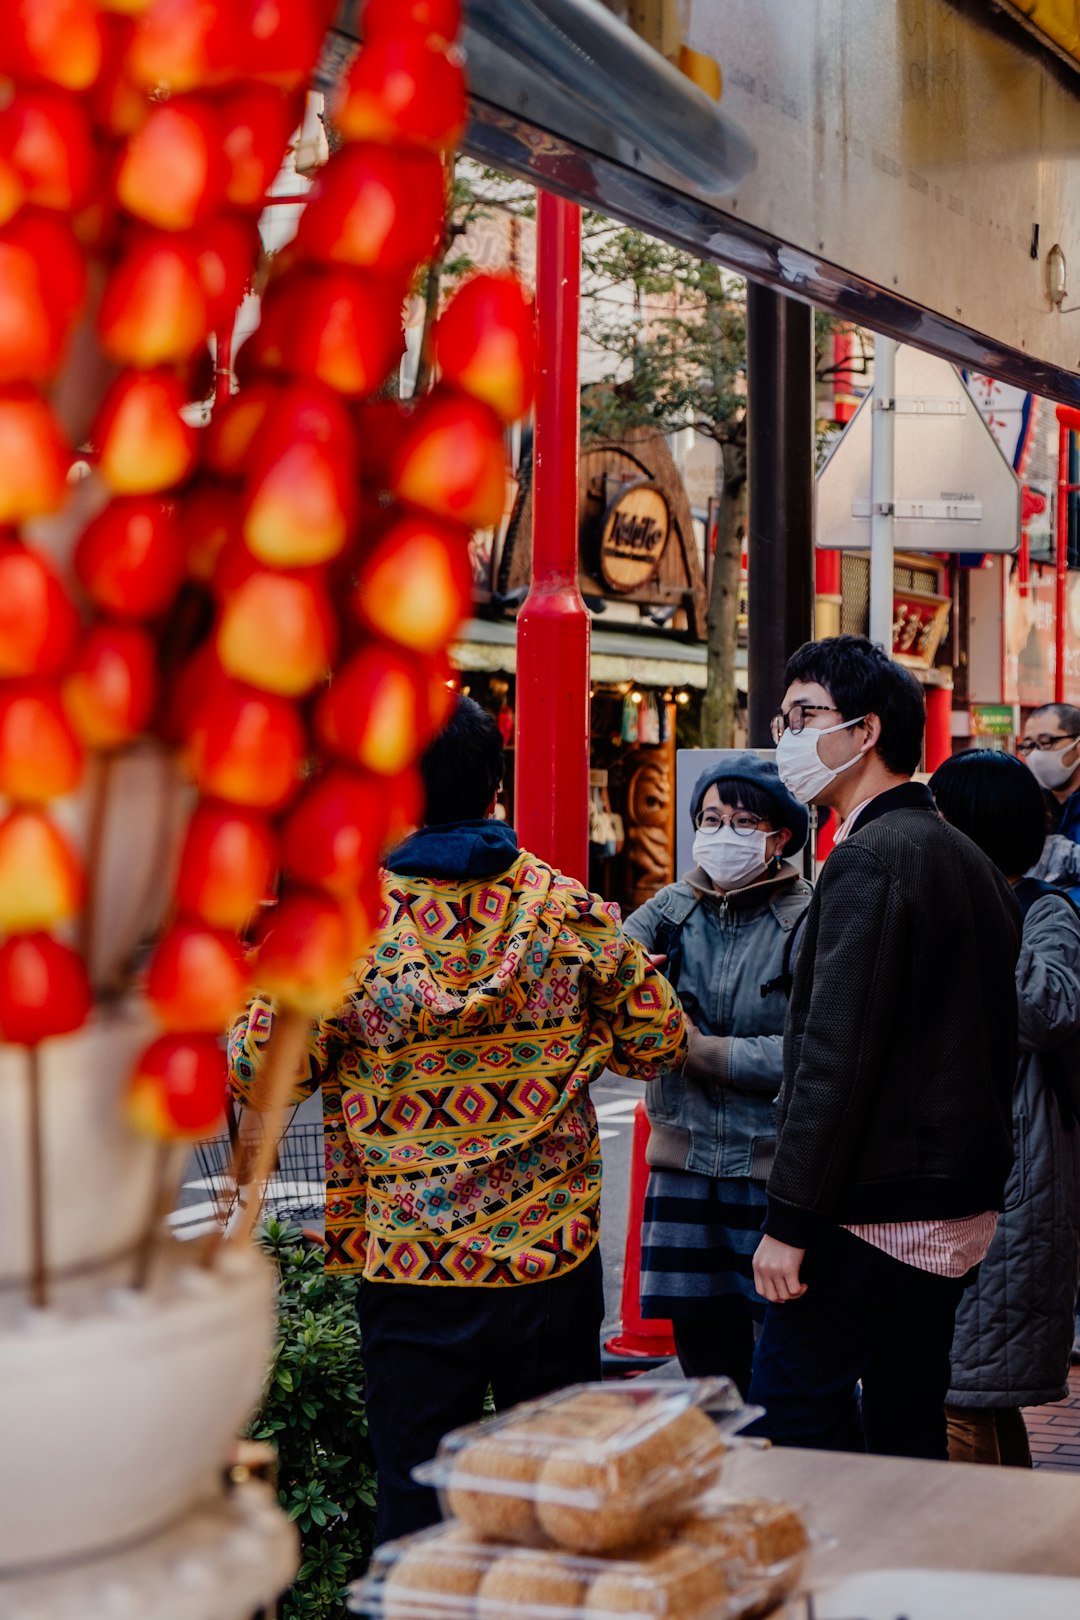 people standing near red round fruits during daytime